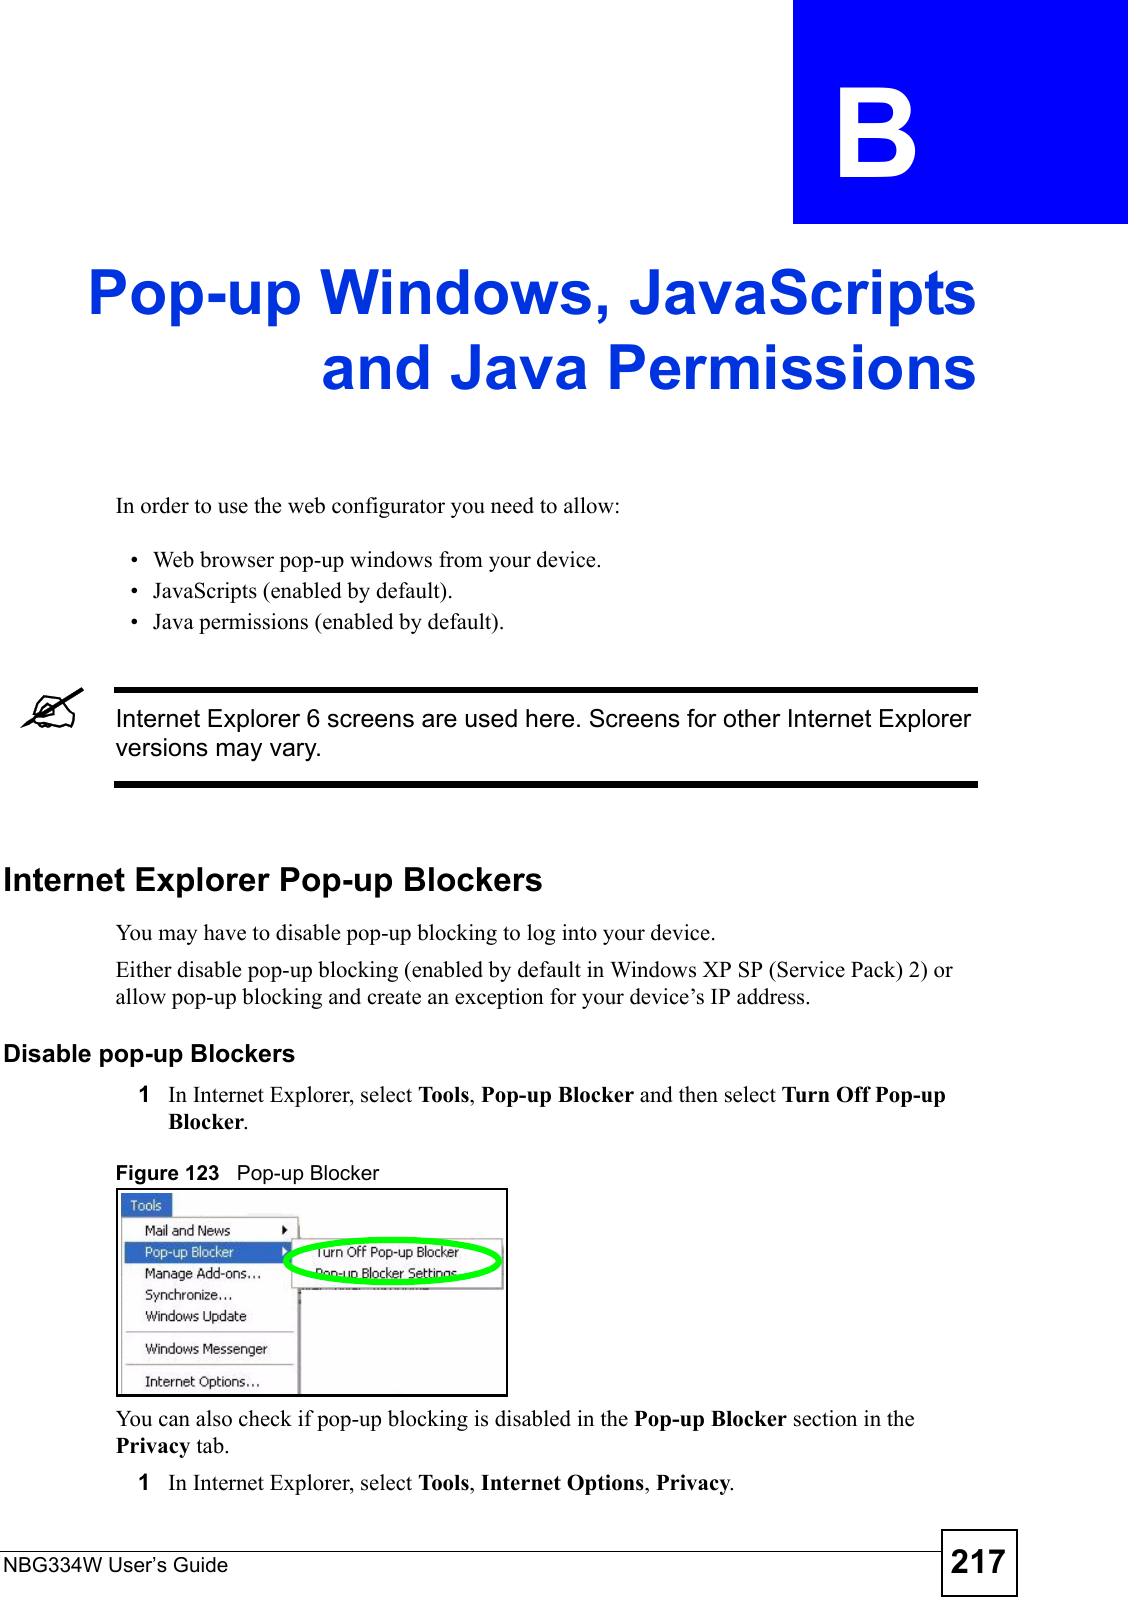 NBG334W User’s Guide 217APPENDIX  B Pop-up Windows, JavaScriptsand Java PermissionsIn order to use the web configurator you need to allow:• Web browser pop-up windows from your device.• JavaScripts (enabled by default).• Java permissions (enabled by default).&quot;Internet Explorer 6 screens are used here. Screens for other Internet Explorer versions may vary.Internet Explorer Pop-up BlockersYou may have to disable pop-up blocking to log into your device. Either disable pop-up blocking (enabled by default in Windows XP SP (Service Pack) 2) or allow pop-up blocking and create an exception for your device’s IP address.Disable pop-up Blockers1In Internet Explorer, select To ols , Pop-up Blocker and then select Turn Off Pop-up Blocker. Figure 123   Pop-up BlockerYou can also check if pop-up blocking is disabled in the Pop-up Blocker section in the Privacy tab. 1In Internet Explorer, select To ols , Internet Options, Privacy.